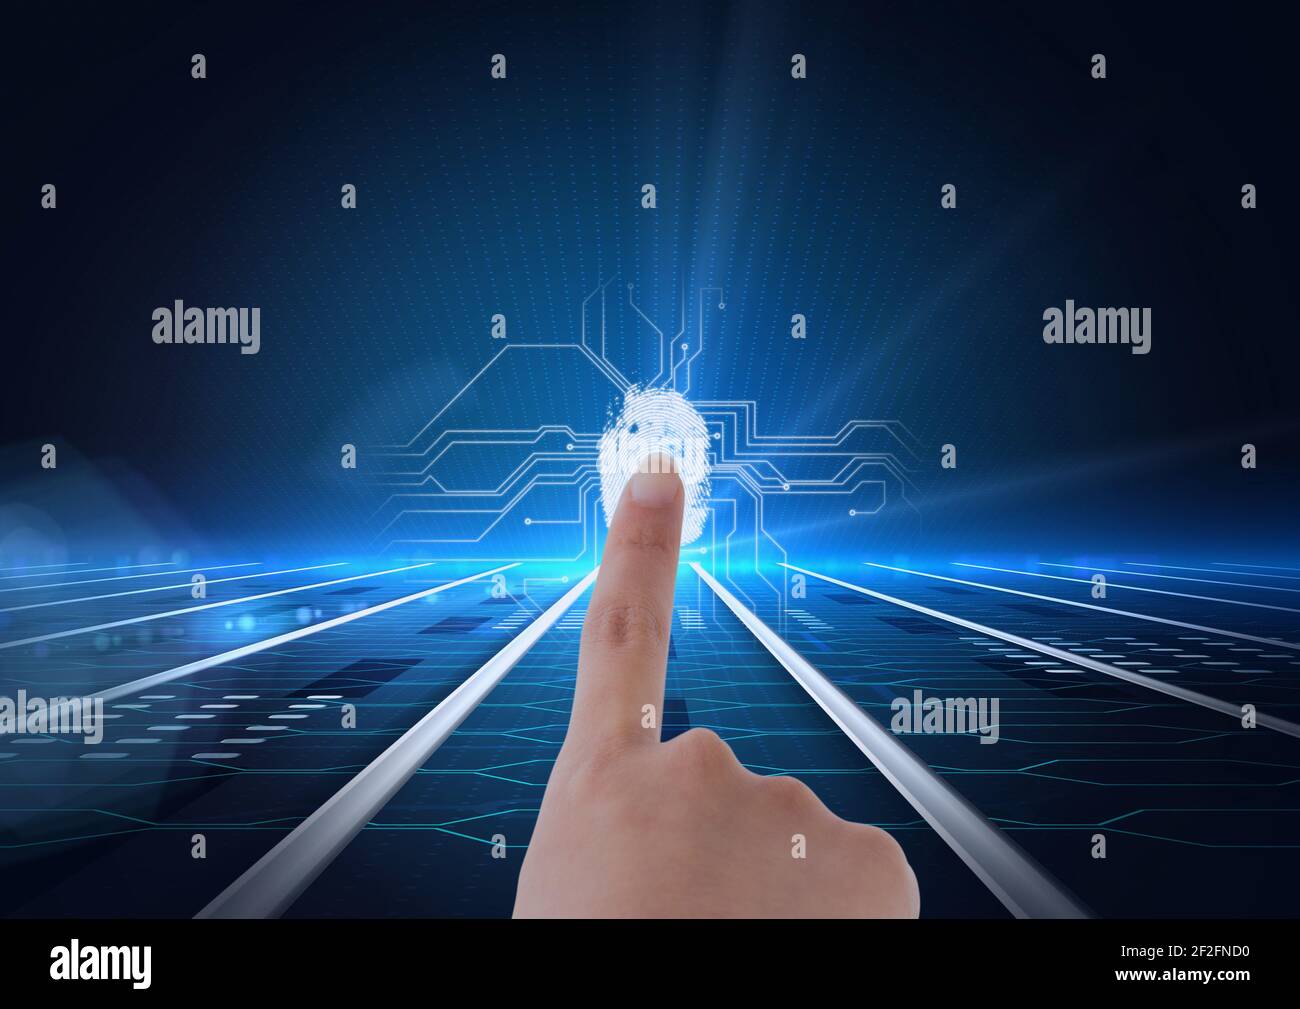 Human finger scanning over biometric scanner against microprocessor connections on blue background Stock Photo